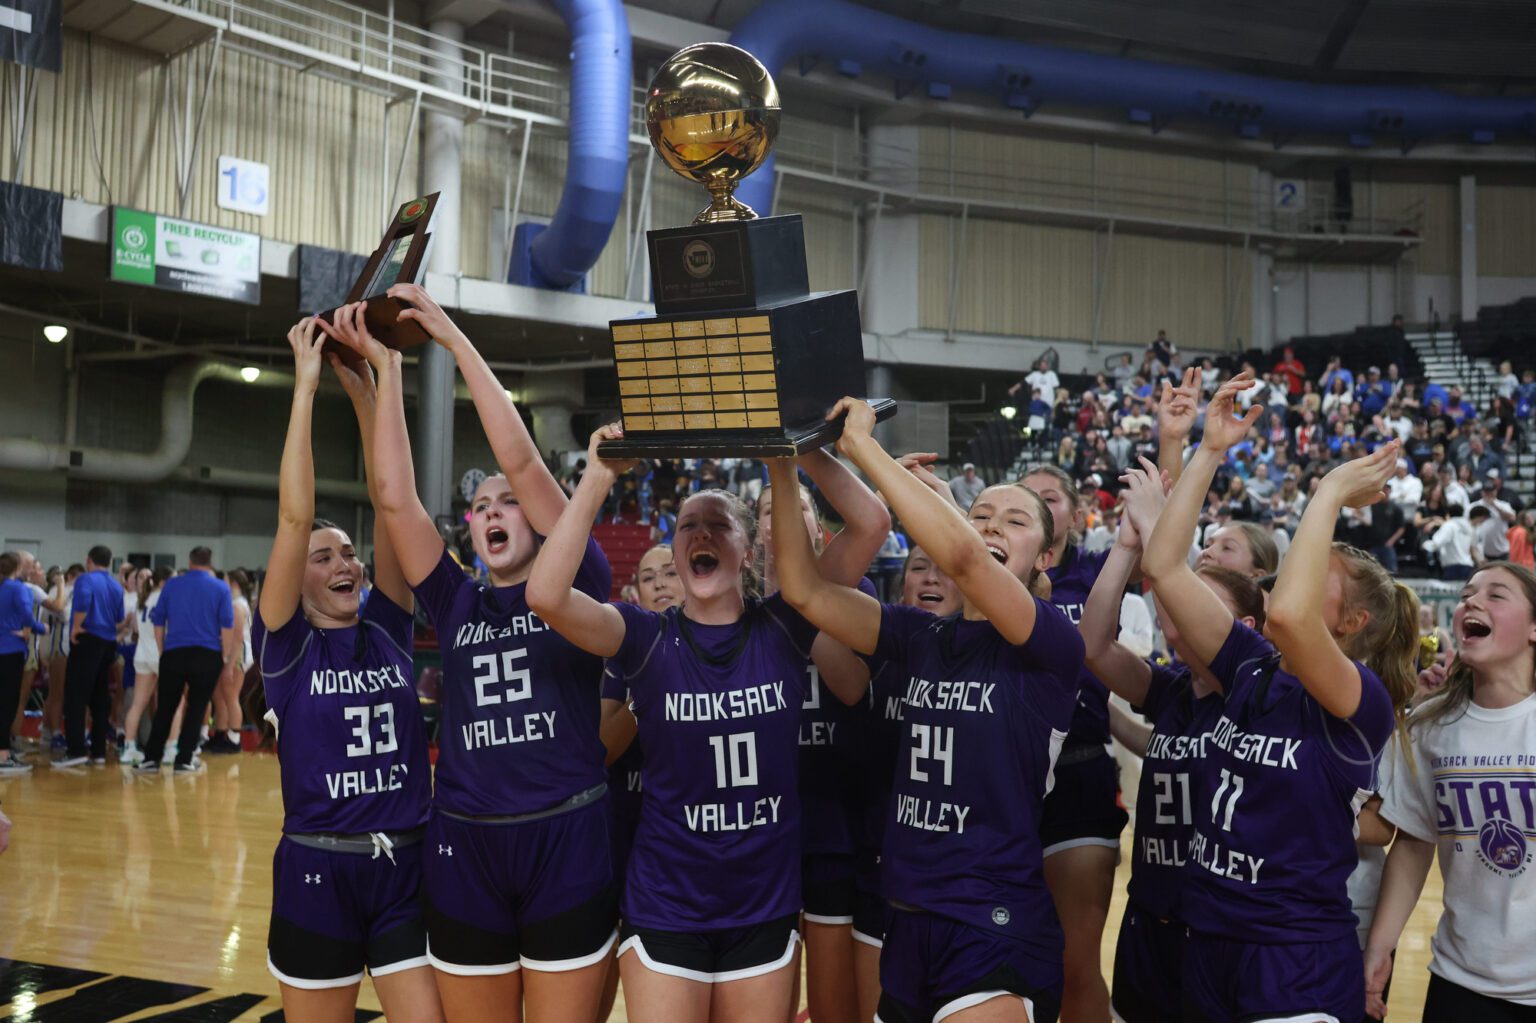 Nooksack Valley celebrates after beating Deer Park, 70-67, on Saturday, March 2 to clinch back-to-back state titles at the Yakima Valley SunDome.